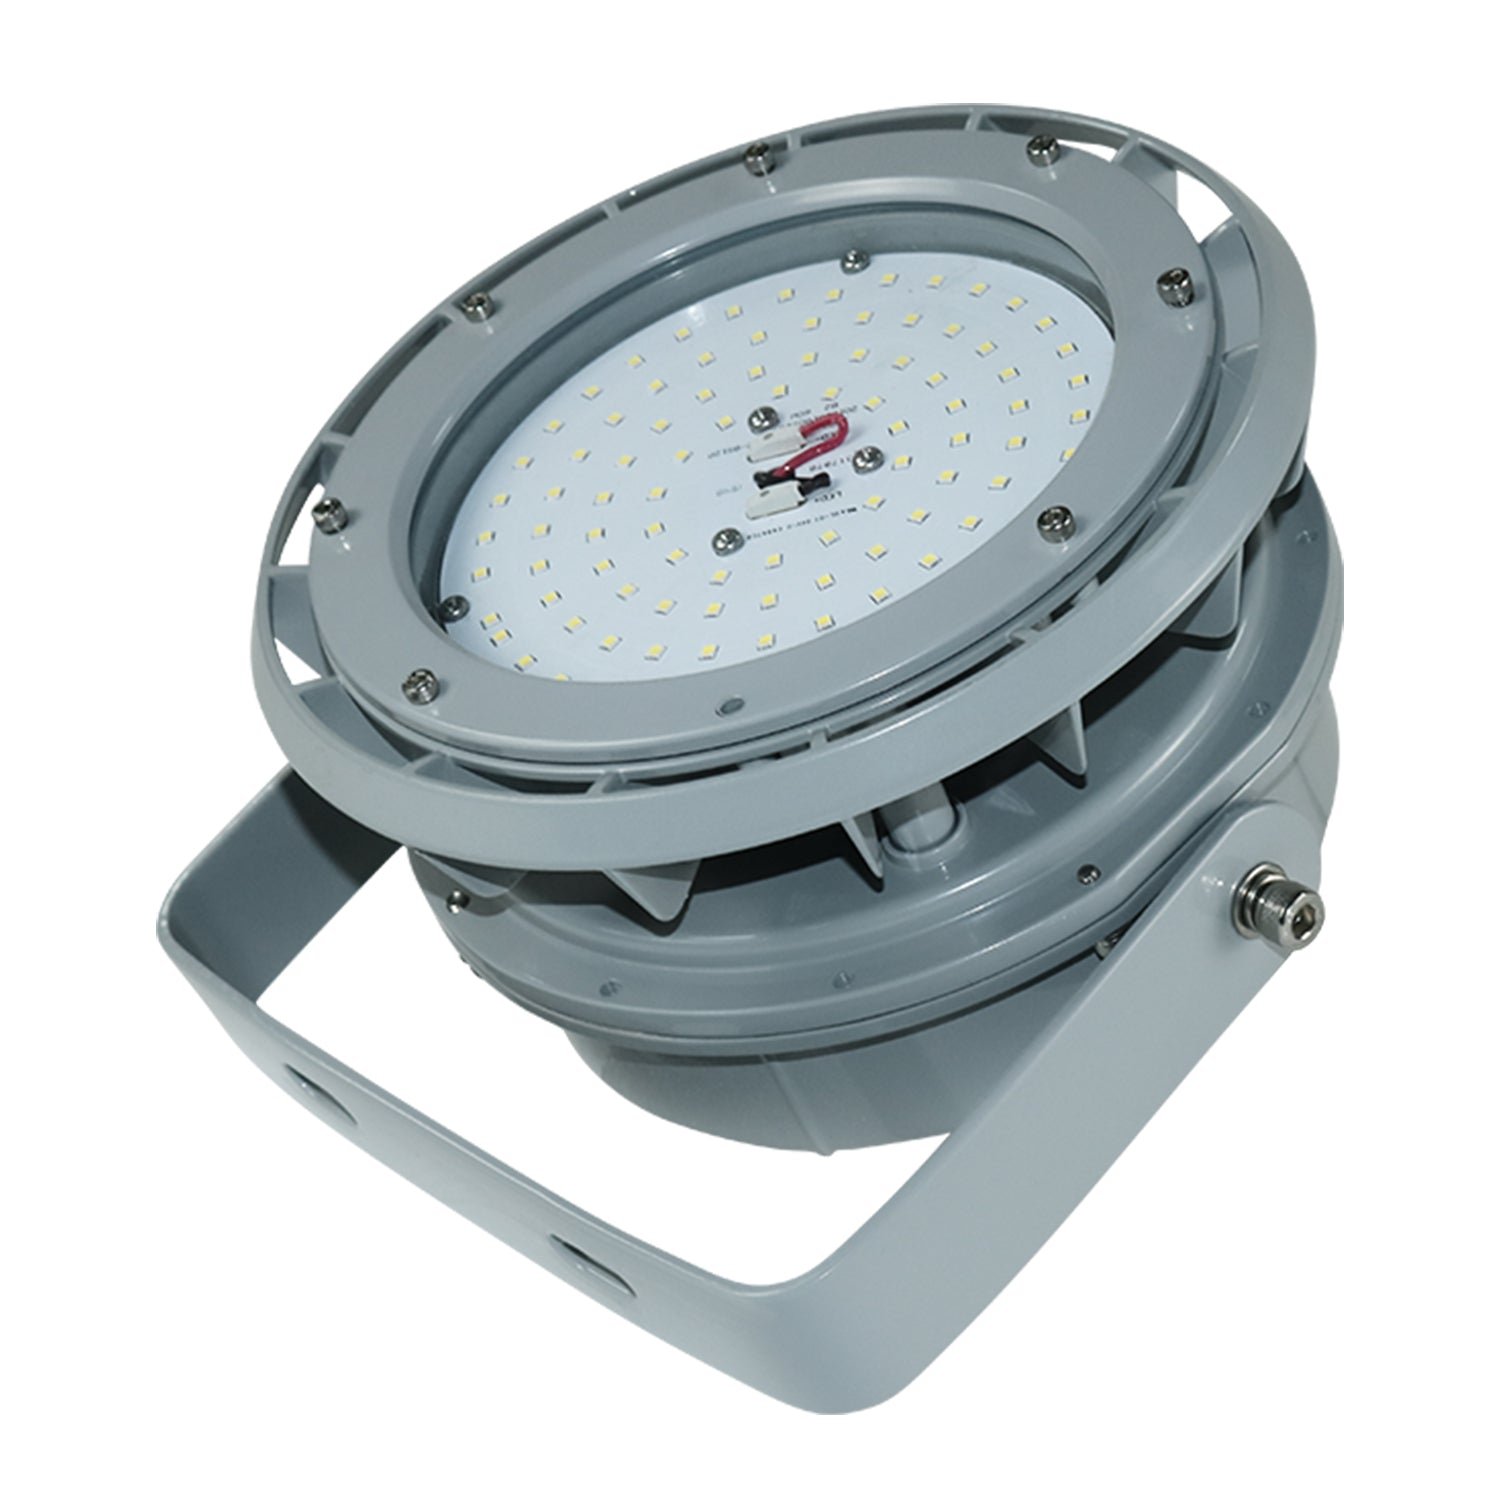 B Series 250W Dimmable LED Explosion Proof Lighting - 5000K, 35000LM, IP66 Rated for Hazardous Locations - Ideal for Oil &amp; Gas Refineries, Drilling Rigs, Petrochemical Facilities